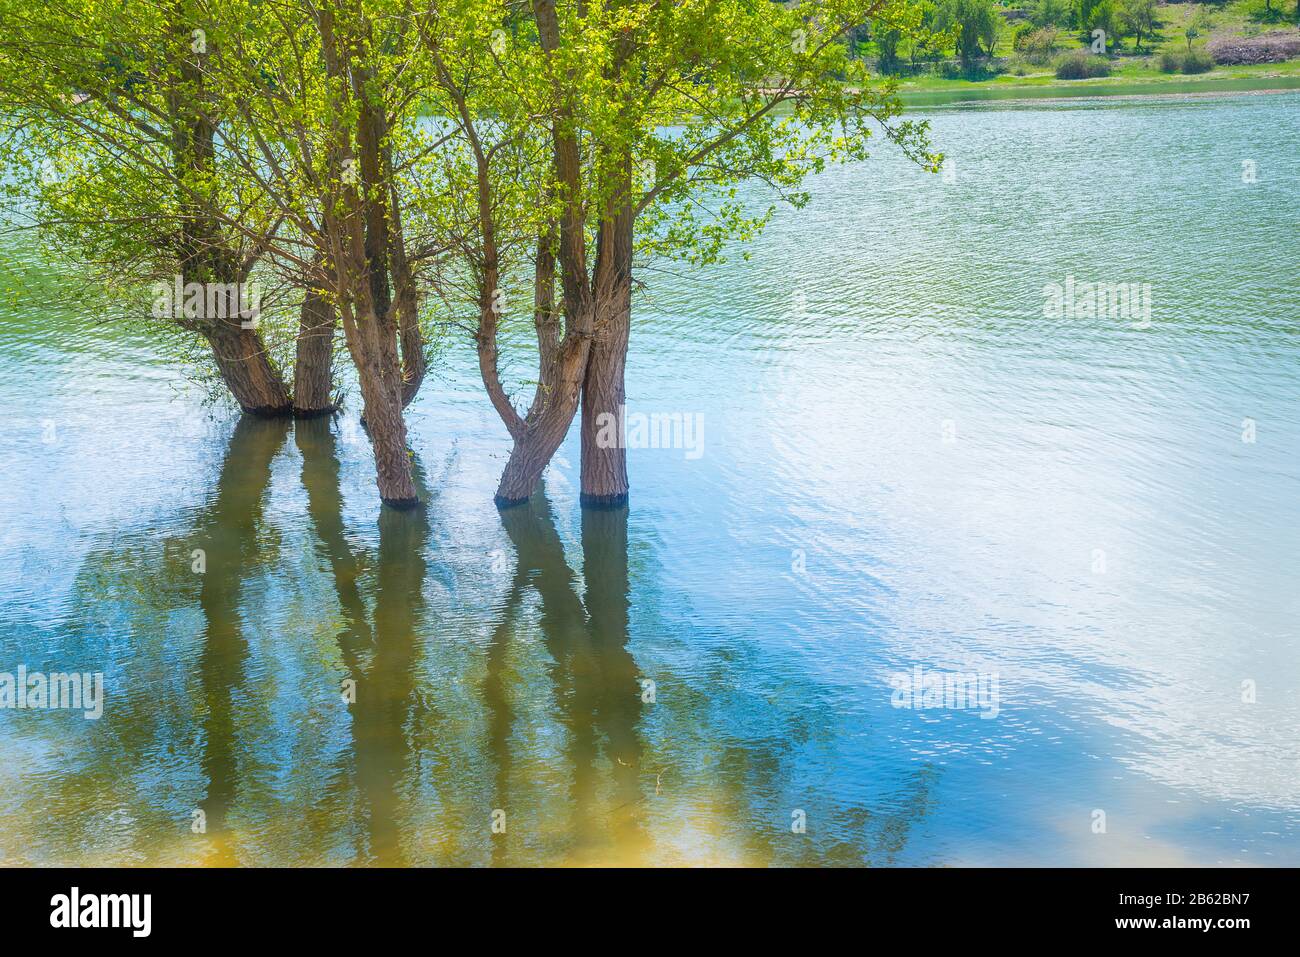 Trees and their reflections on water. Stock Photo